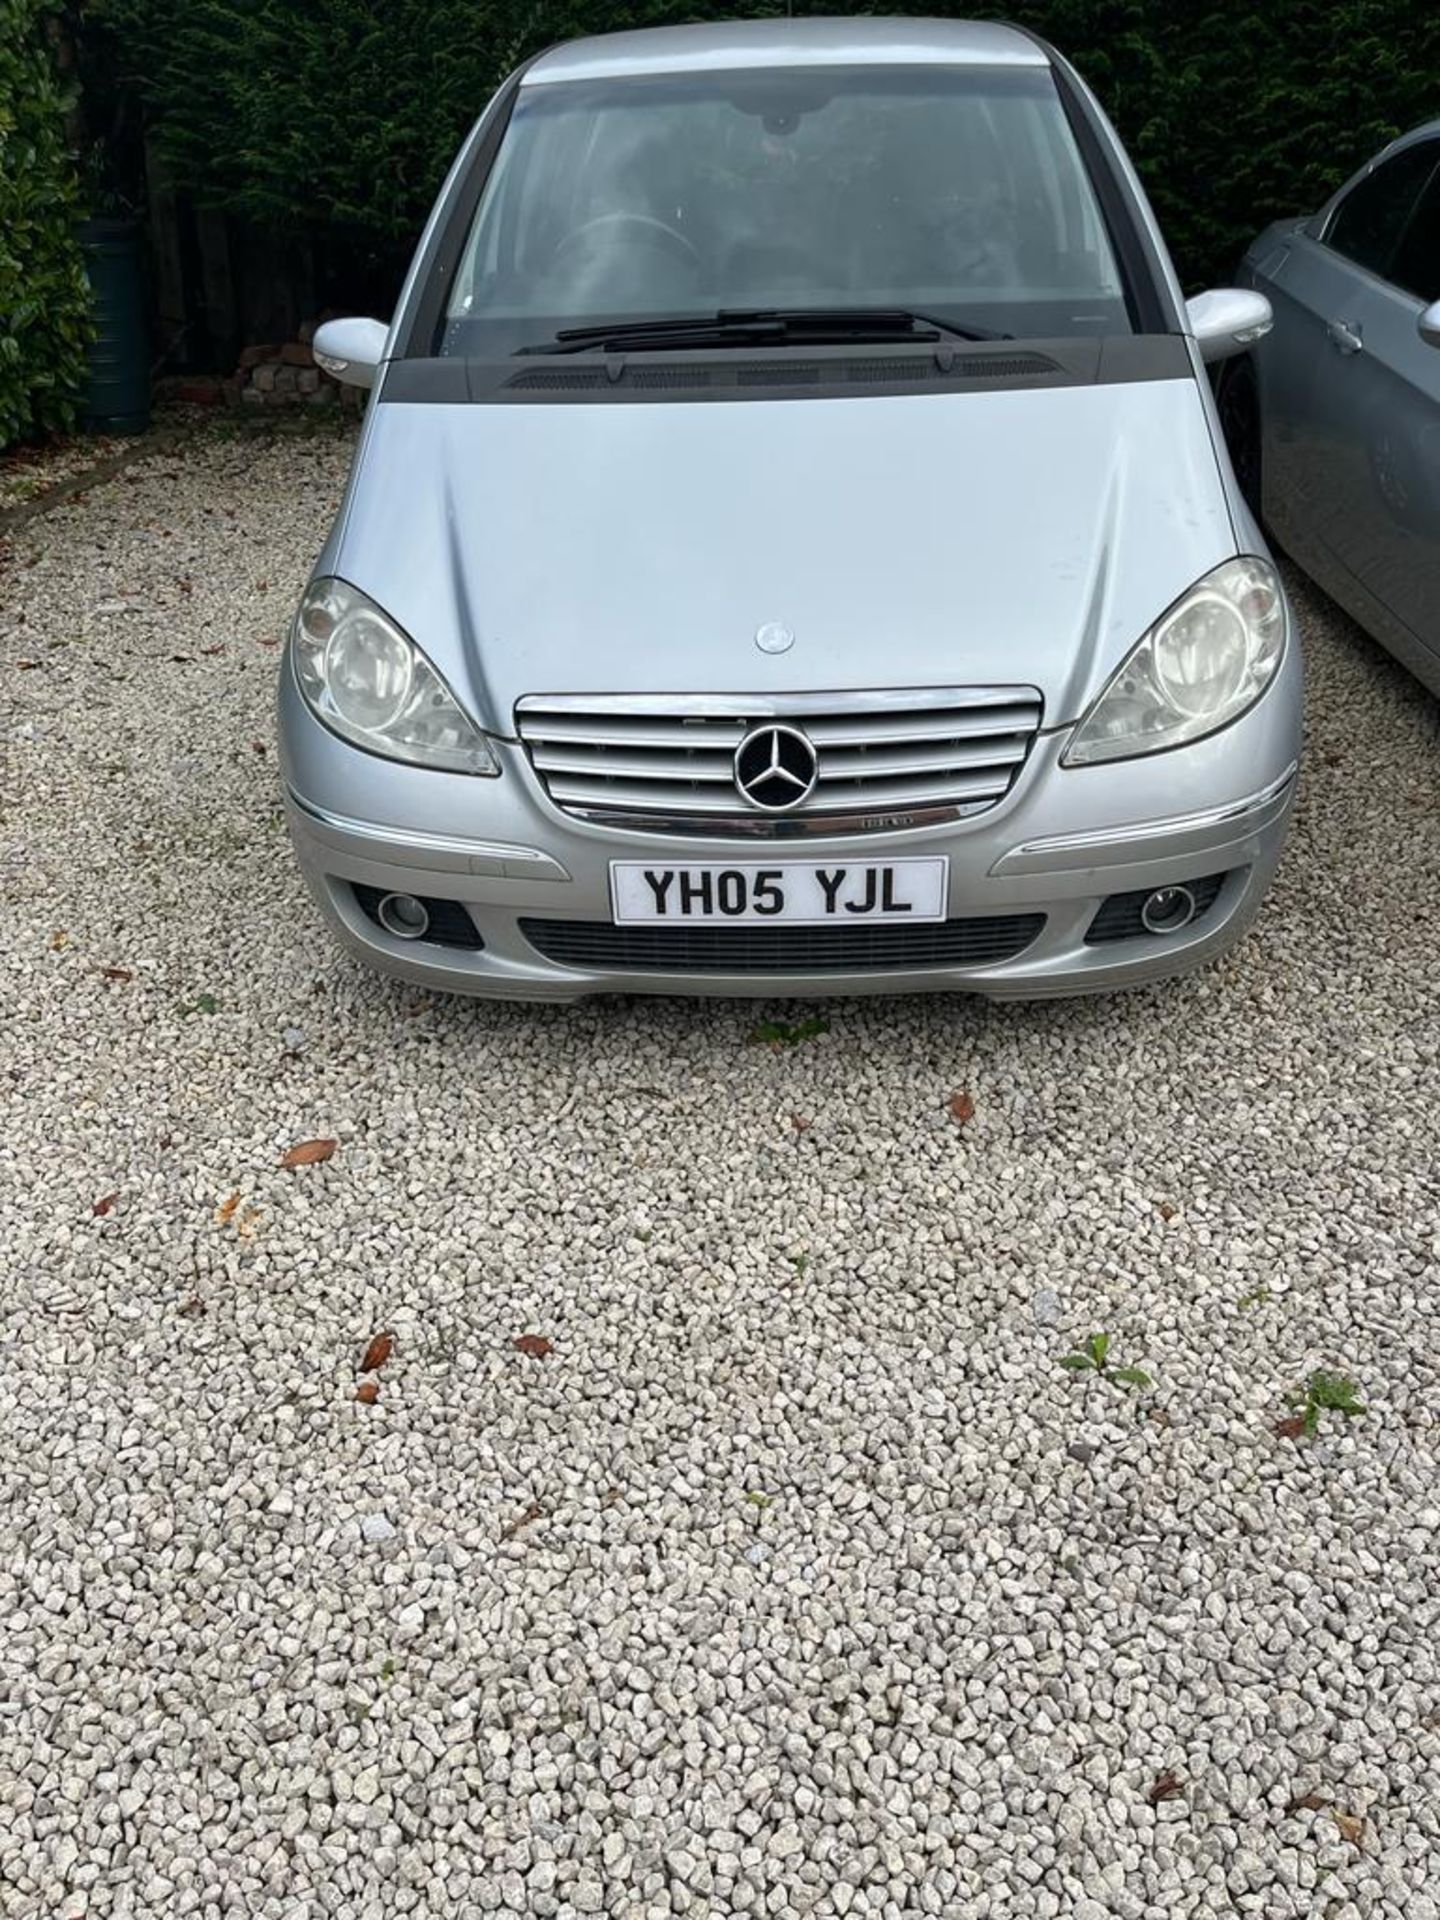 MERCEDES A160 CDI ELEGANT SE AUTOMATIC YH05YJL 104000 MILES 5 DOOR LEATHER MOT 04/10/23 LOTS OF - Image 2 of 7